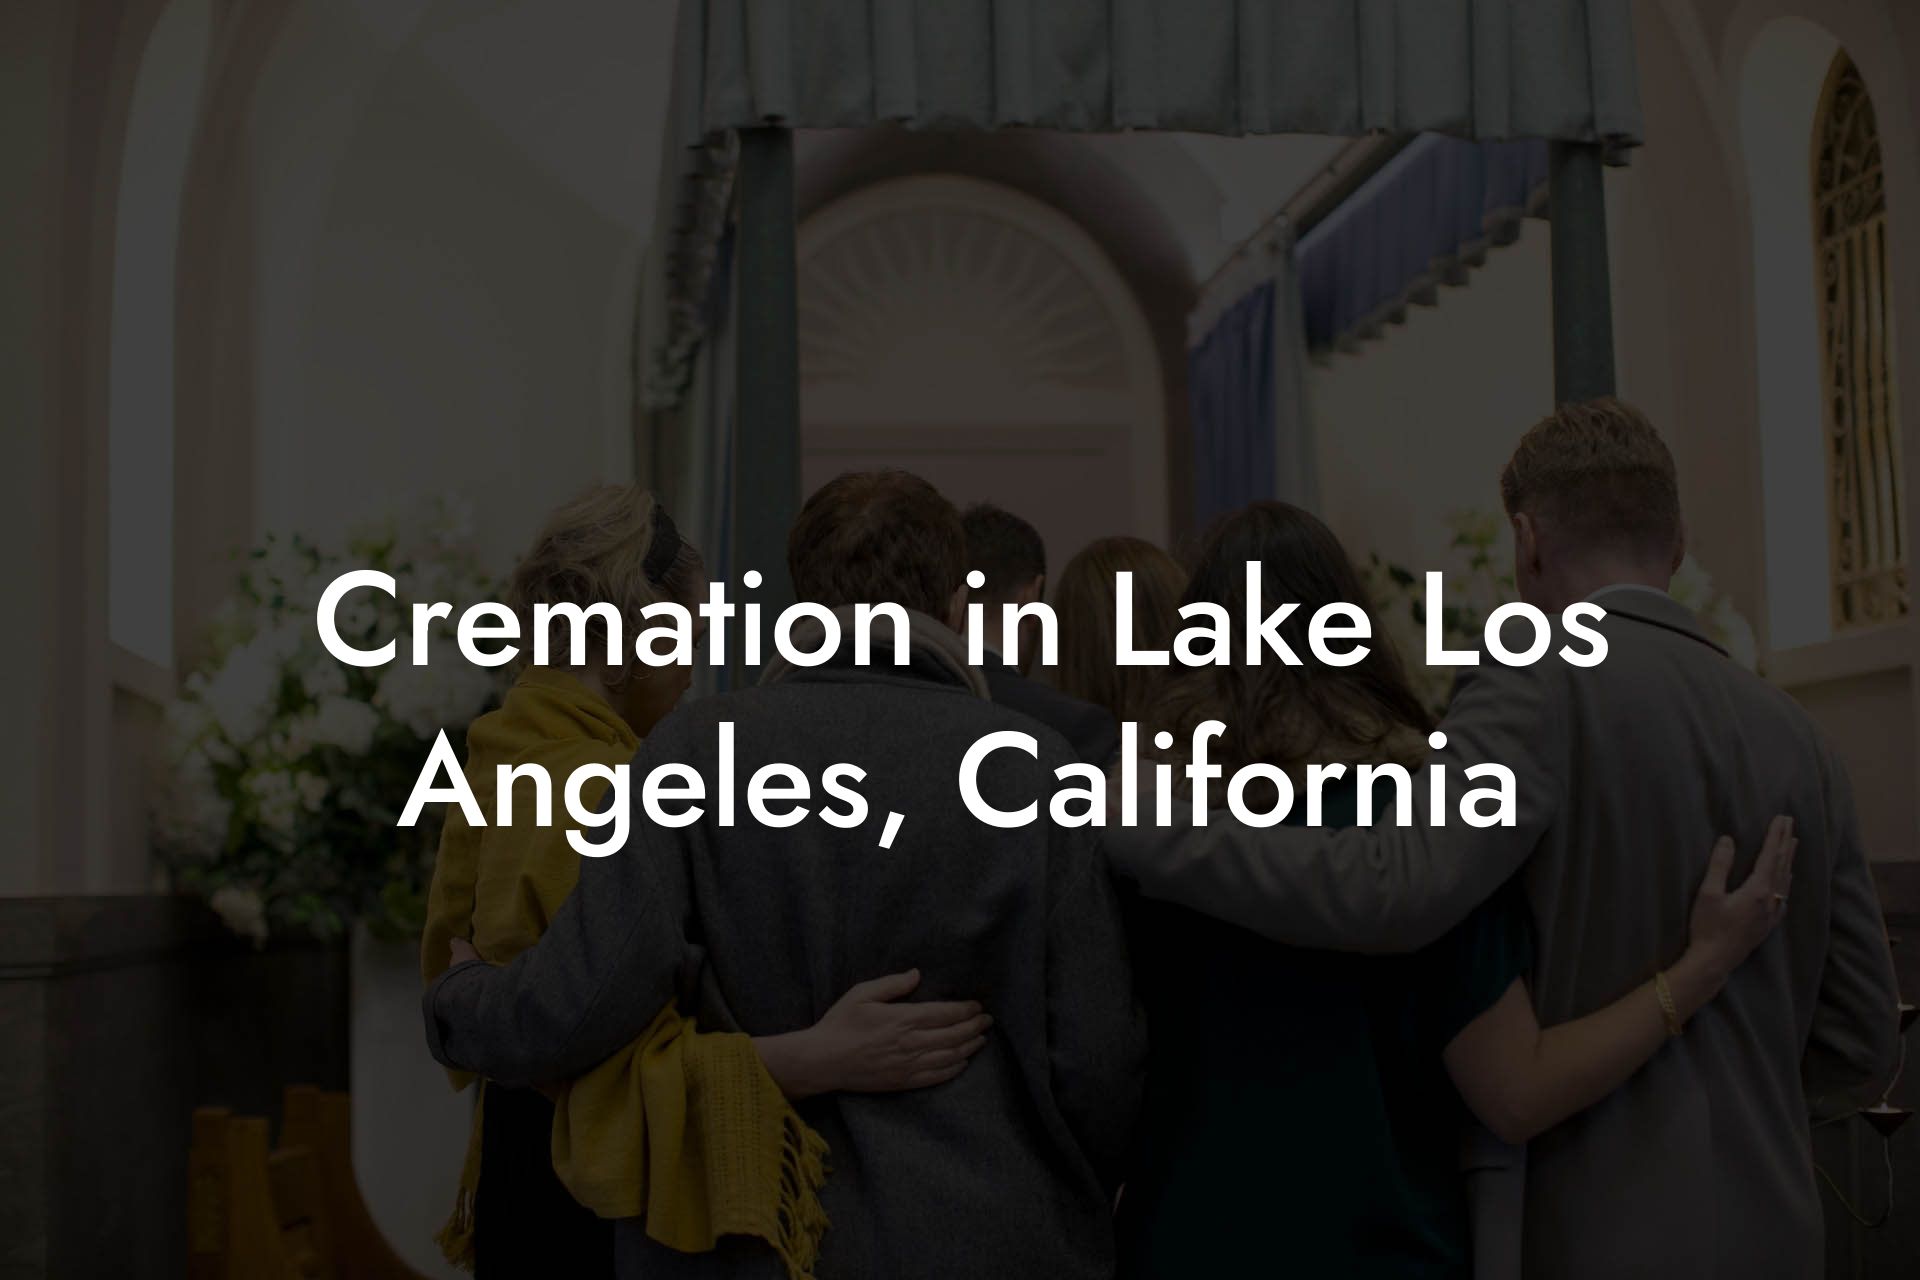 Cremation in Lake Los Angeles, California